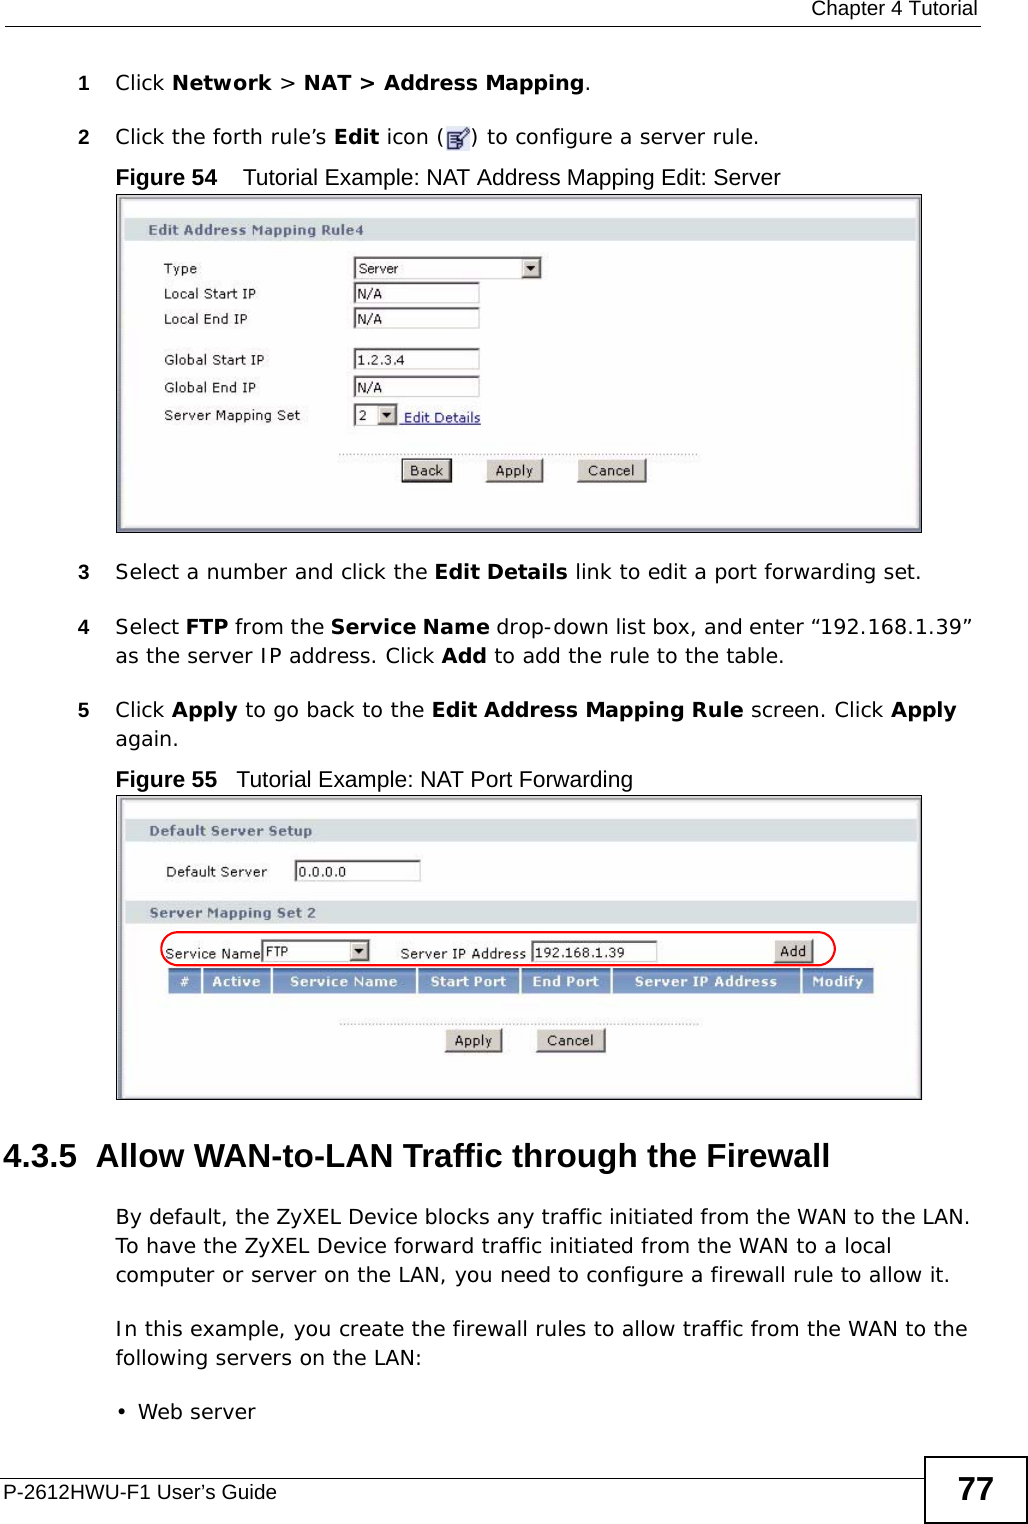  Chapter 4 TutorialP-2612HWU-F1 User’s Guide 771Click Network &gt; NAT &gt; Address Mapping.2Click the forth rule’s Edit icon ( ) to configure a server rule.Figure 54    Tutorial Example: NAT Address Mapping Edit: Server 3Select a number and click the Edit Details link to edit a port forwarding set.4Select FTP from the Service Name drop-down list box, and enter “192.168.1.39” as the server IP address. Click Add to add the rule to the table.5Click Apply to go back to the Edit Address Mapping Rule screen. Click Apply again.Figure 55   Tutorial Example: NAT Port Forwarding4.3.5  Allow WAN-to-LAN Traffic through the FirewallBy default, the ZyXEL Device blocks any traffic initiated from the WAN to the LAN. To have the ZyXEL Device forward traffic initiated from the WAN to a local computer or server on the LAN, you need to configure a firewall rule to allow it.In this example, you create the firewall rules to allow traffic from the WAN to the following servers on the LAN:• Web server